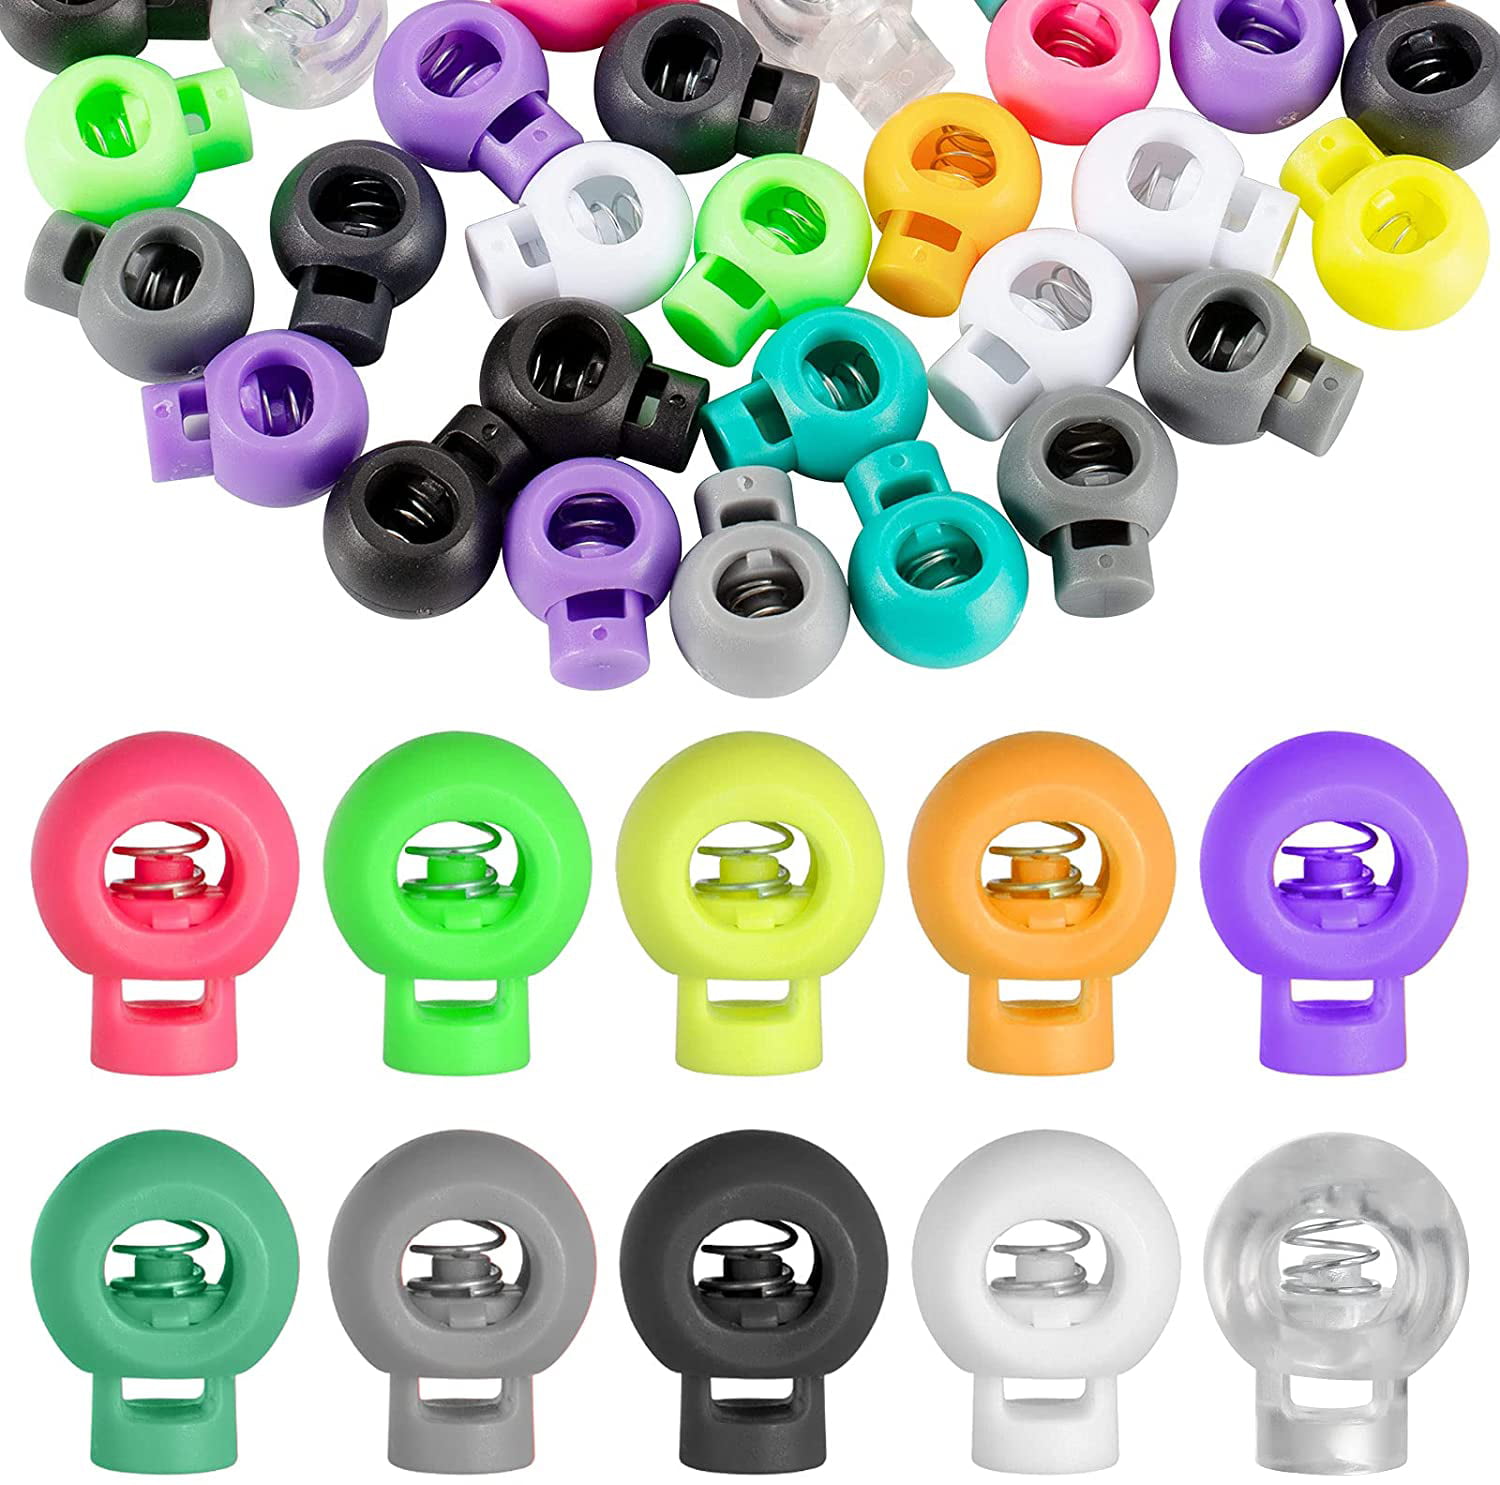 100 Pieces Plastic Spring Cord Lock Double Hole Spring Toggle Stoppers Cord Locks Toggle Cord Lock for Elastic Lanyard Stopper Sliding Fastener Buttons with 20 Pieces Mixed Color Paper Clips 